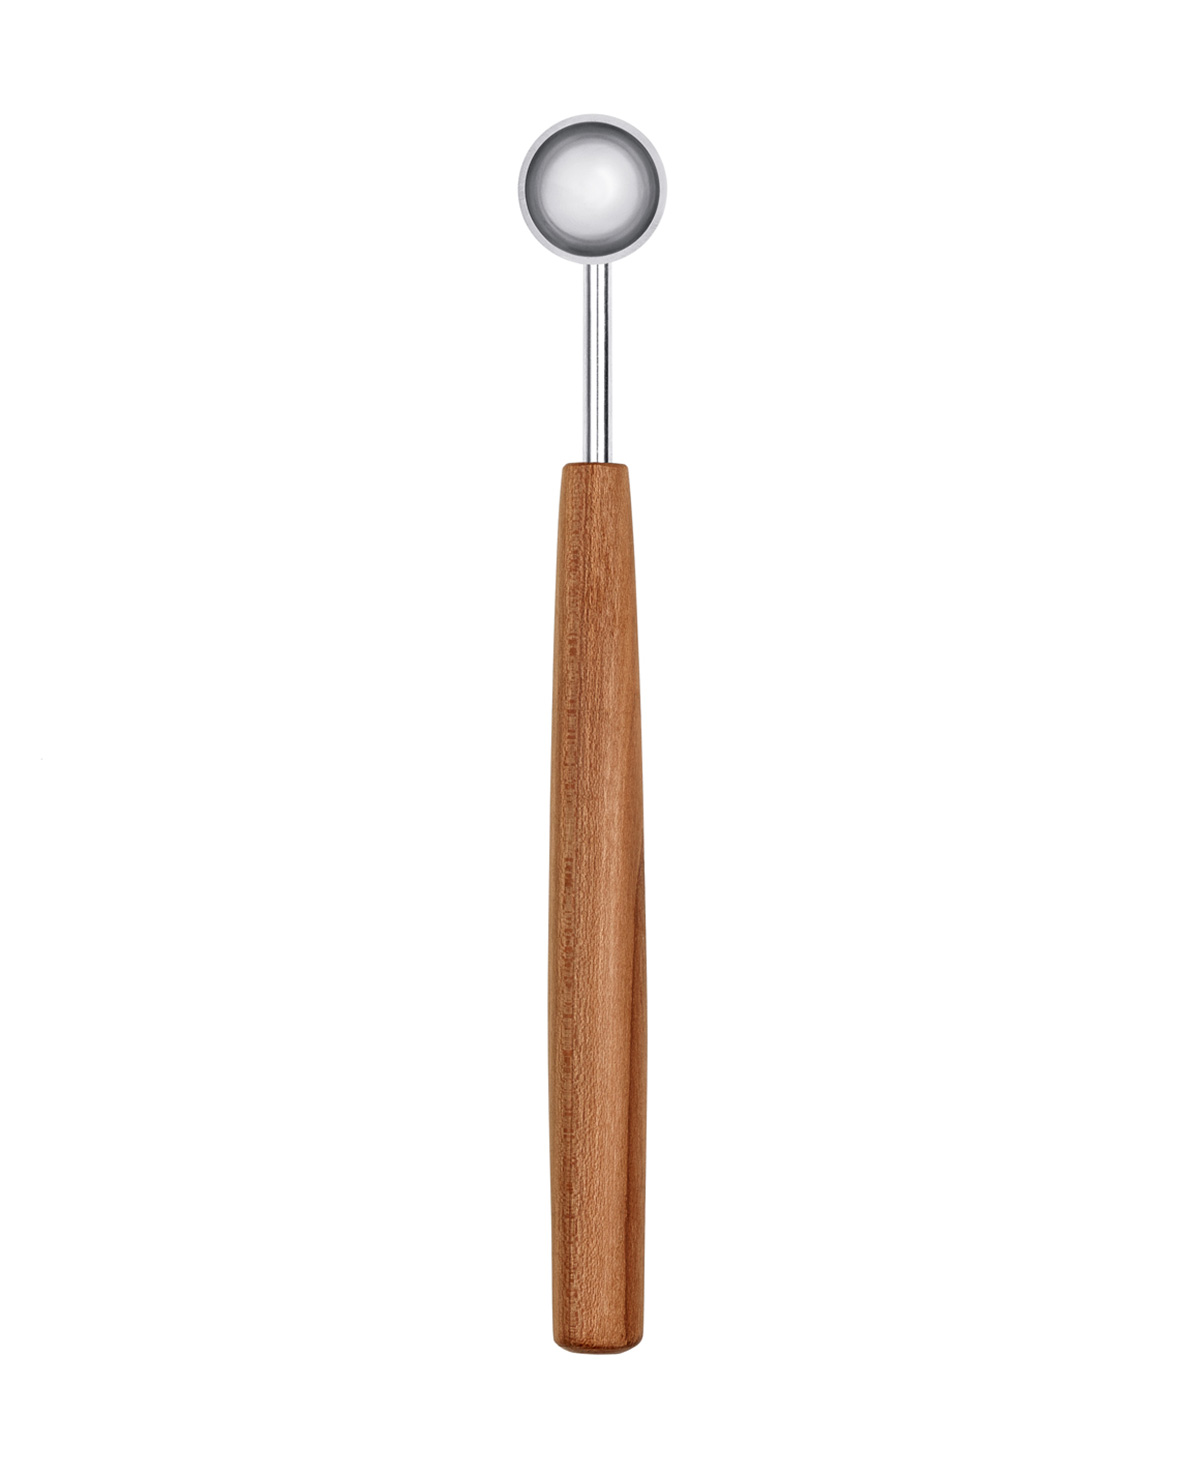 triangle measuring spoon spice Soul teaspoon wood sustainable Made in Germany Solingen plum wood 0,25 tsp